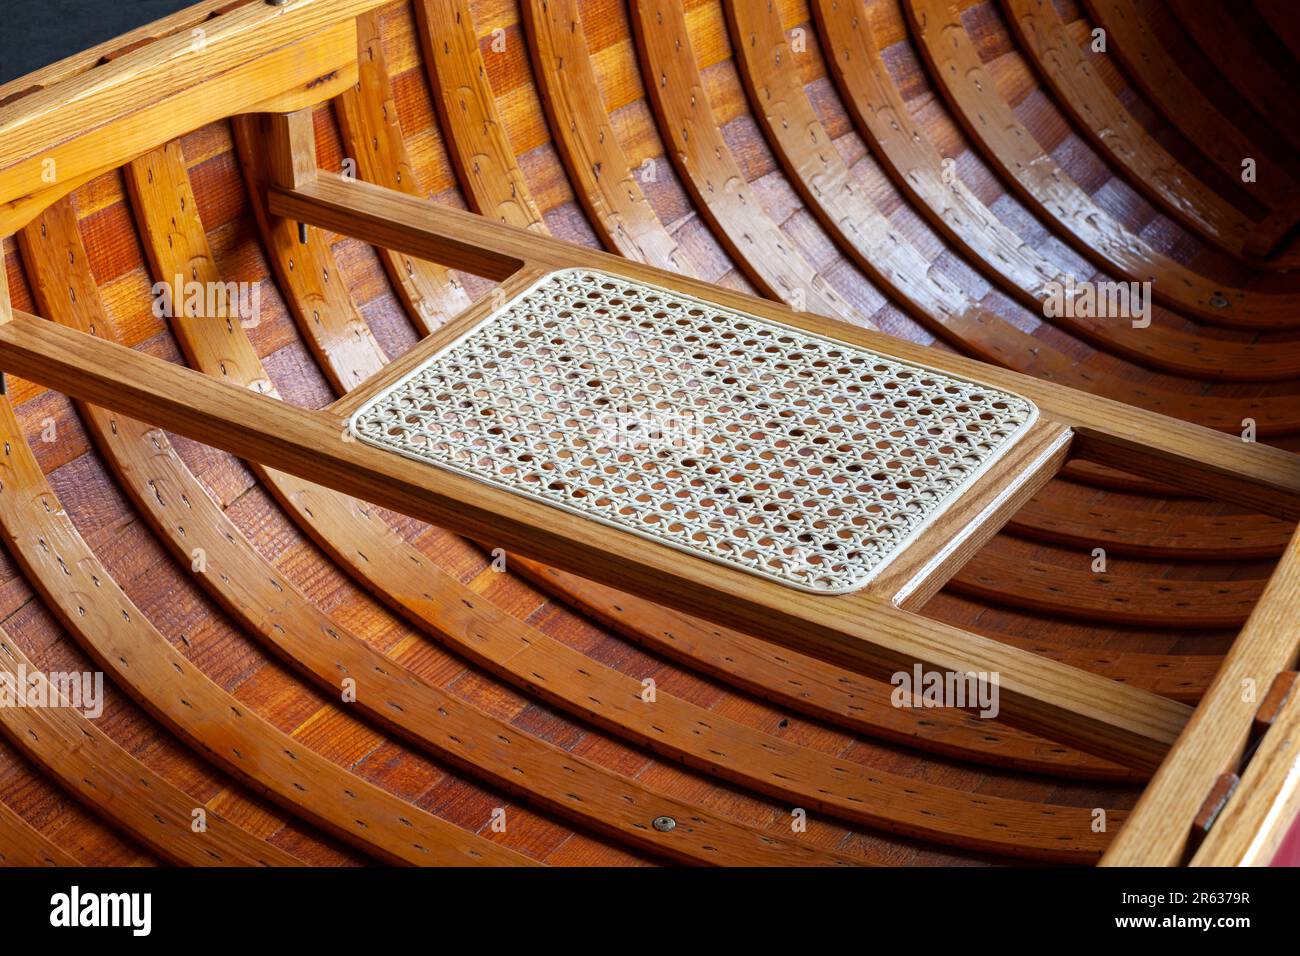 Close up interior shot of a wooden canoe and a caned seat Stock Photo